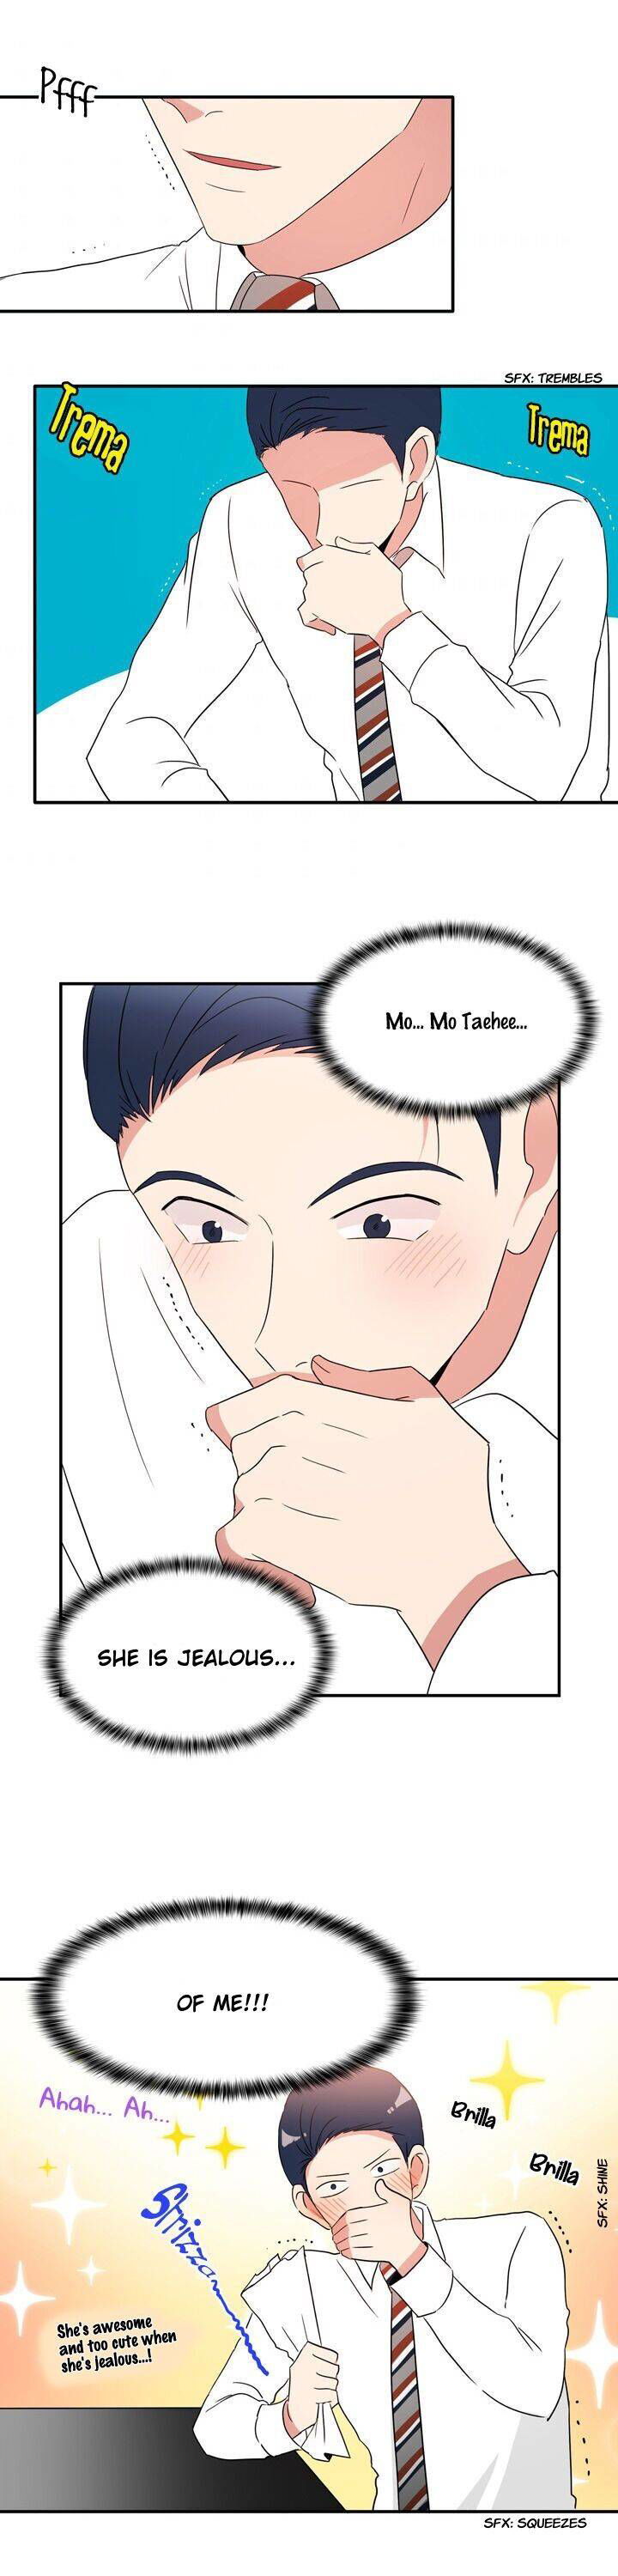 The Problem of My Love Affair Chapter 64 page 13